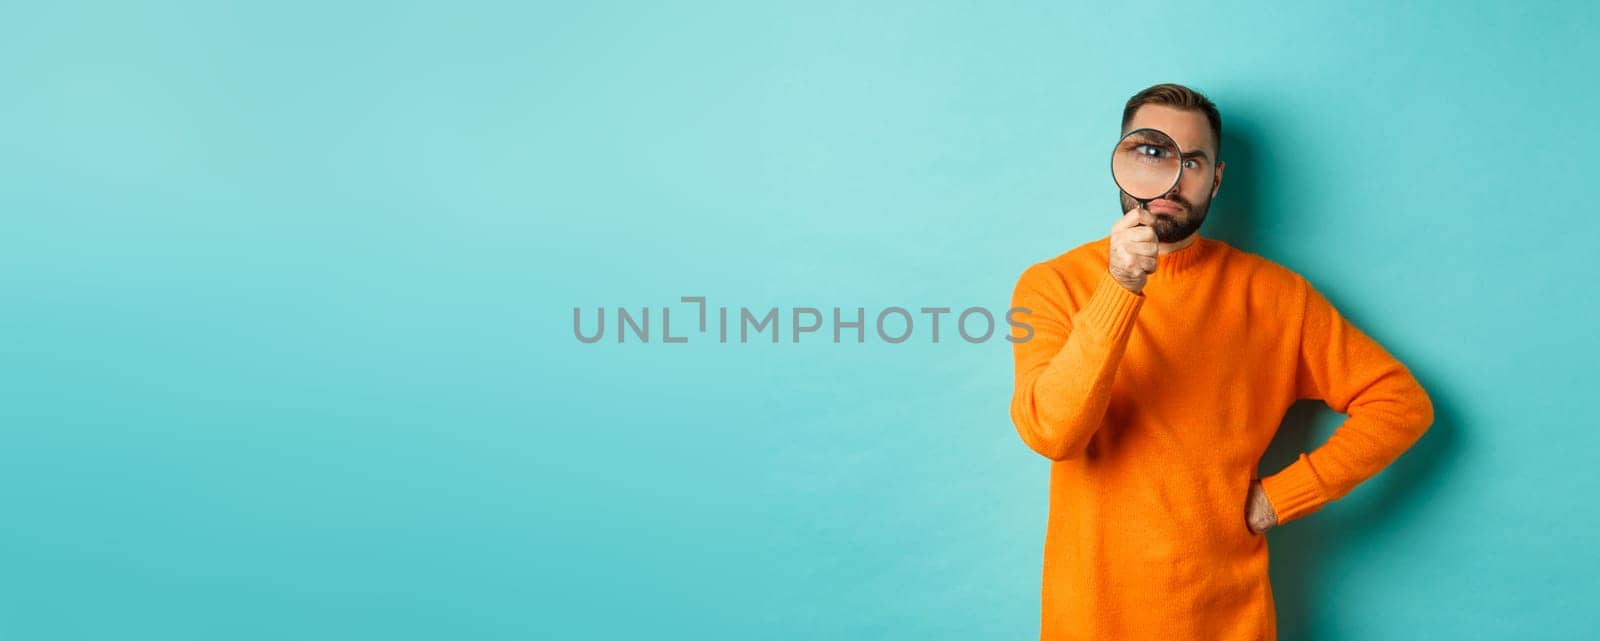 Funny man looking serious through magnifying glass, inspecting something, standing in orange sweater against turquoise background by Benzoix